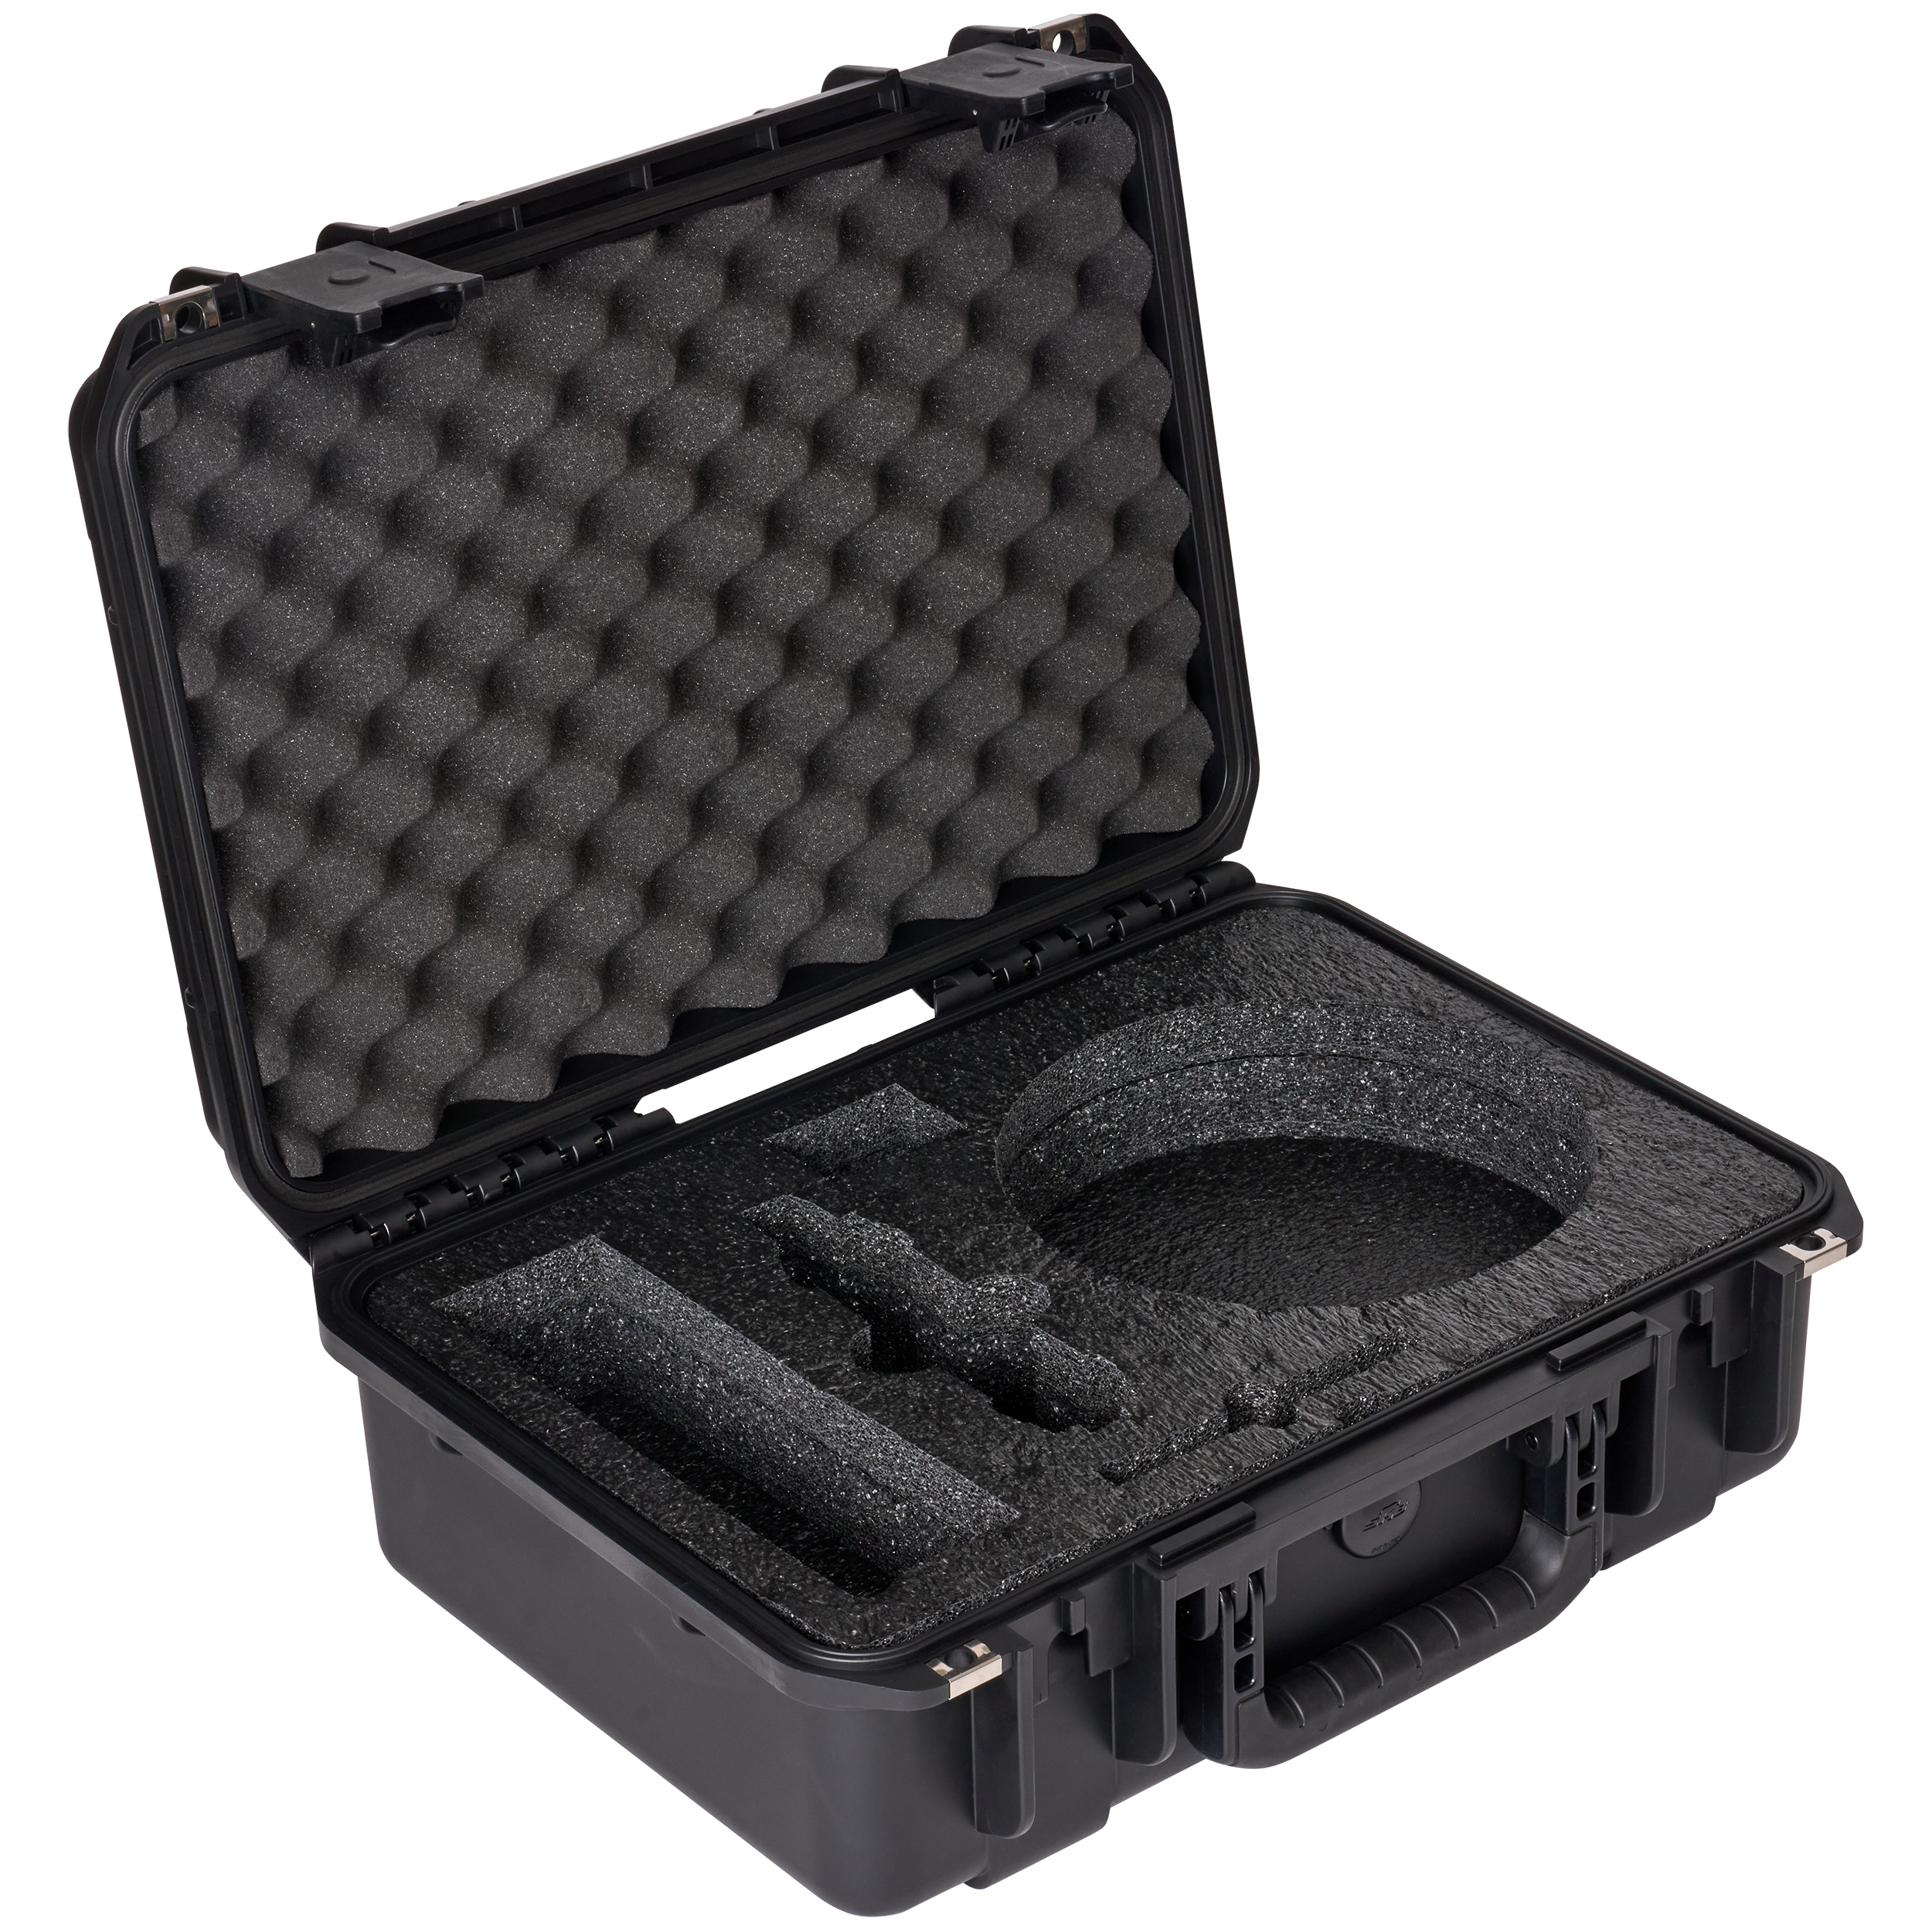 BYFP ipCase for Shure Diversity ShowLink Access Point